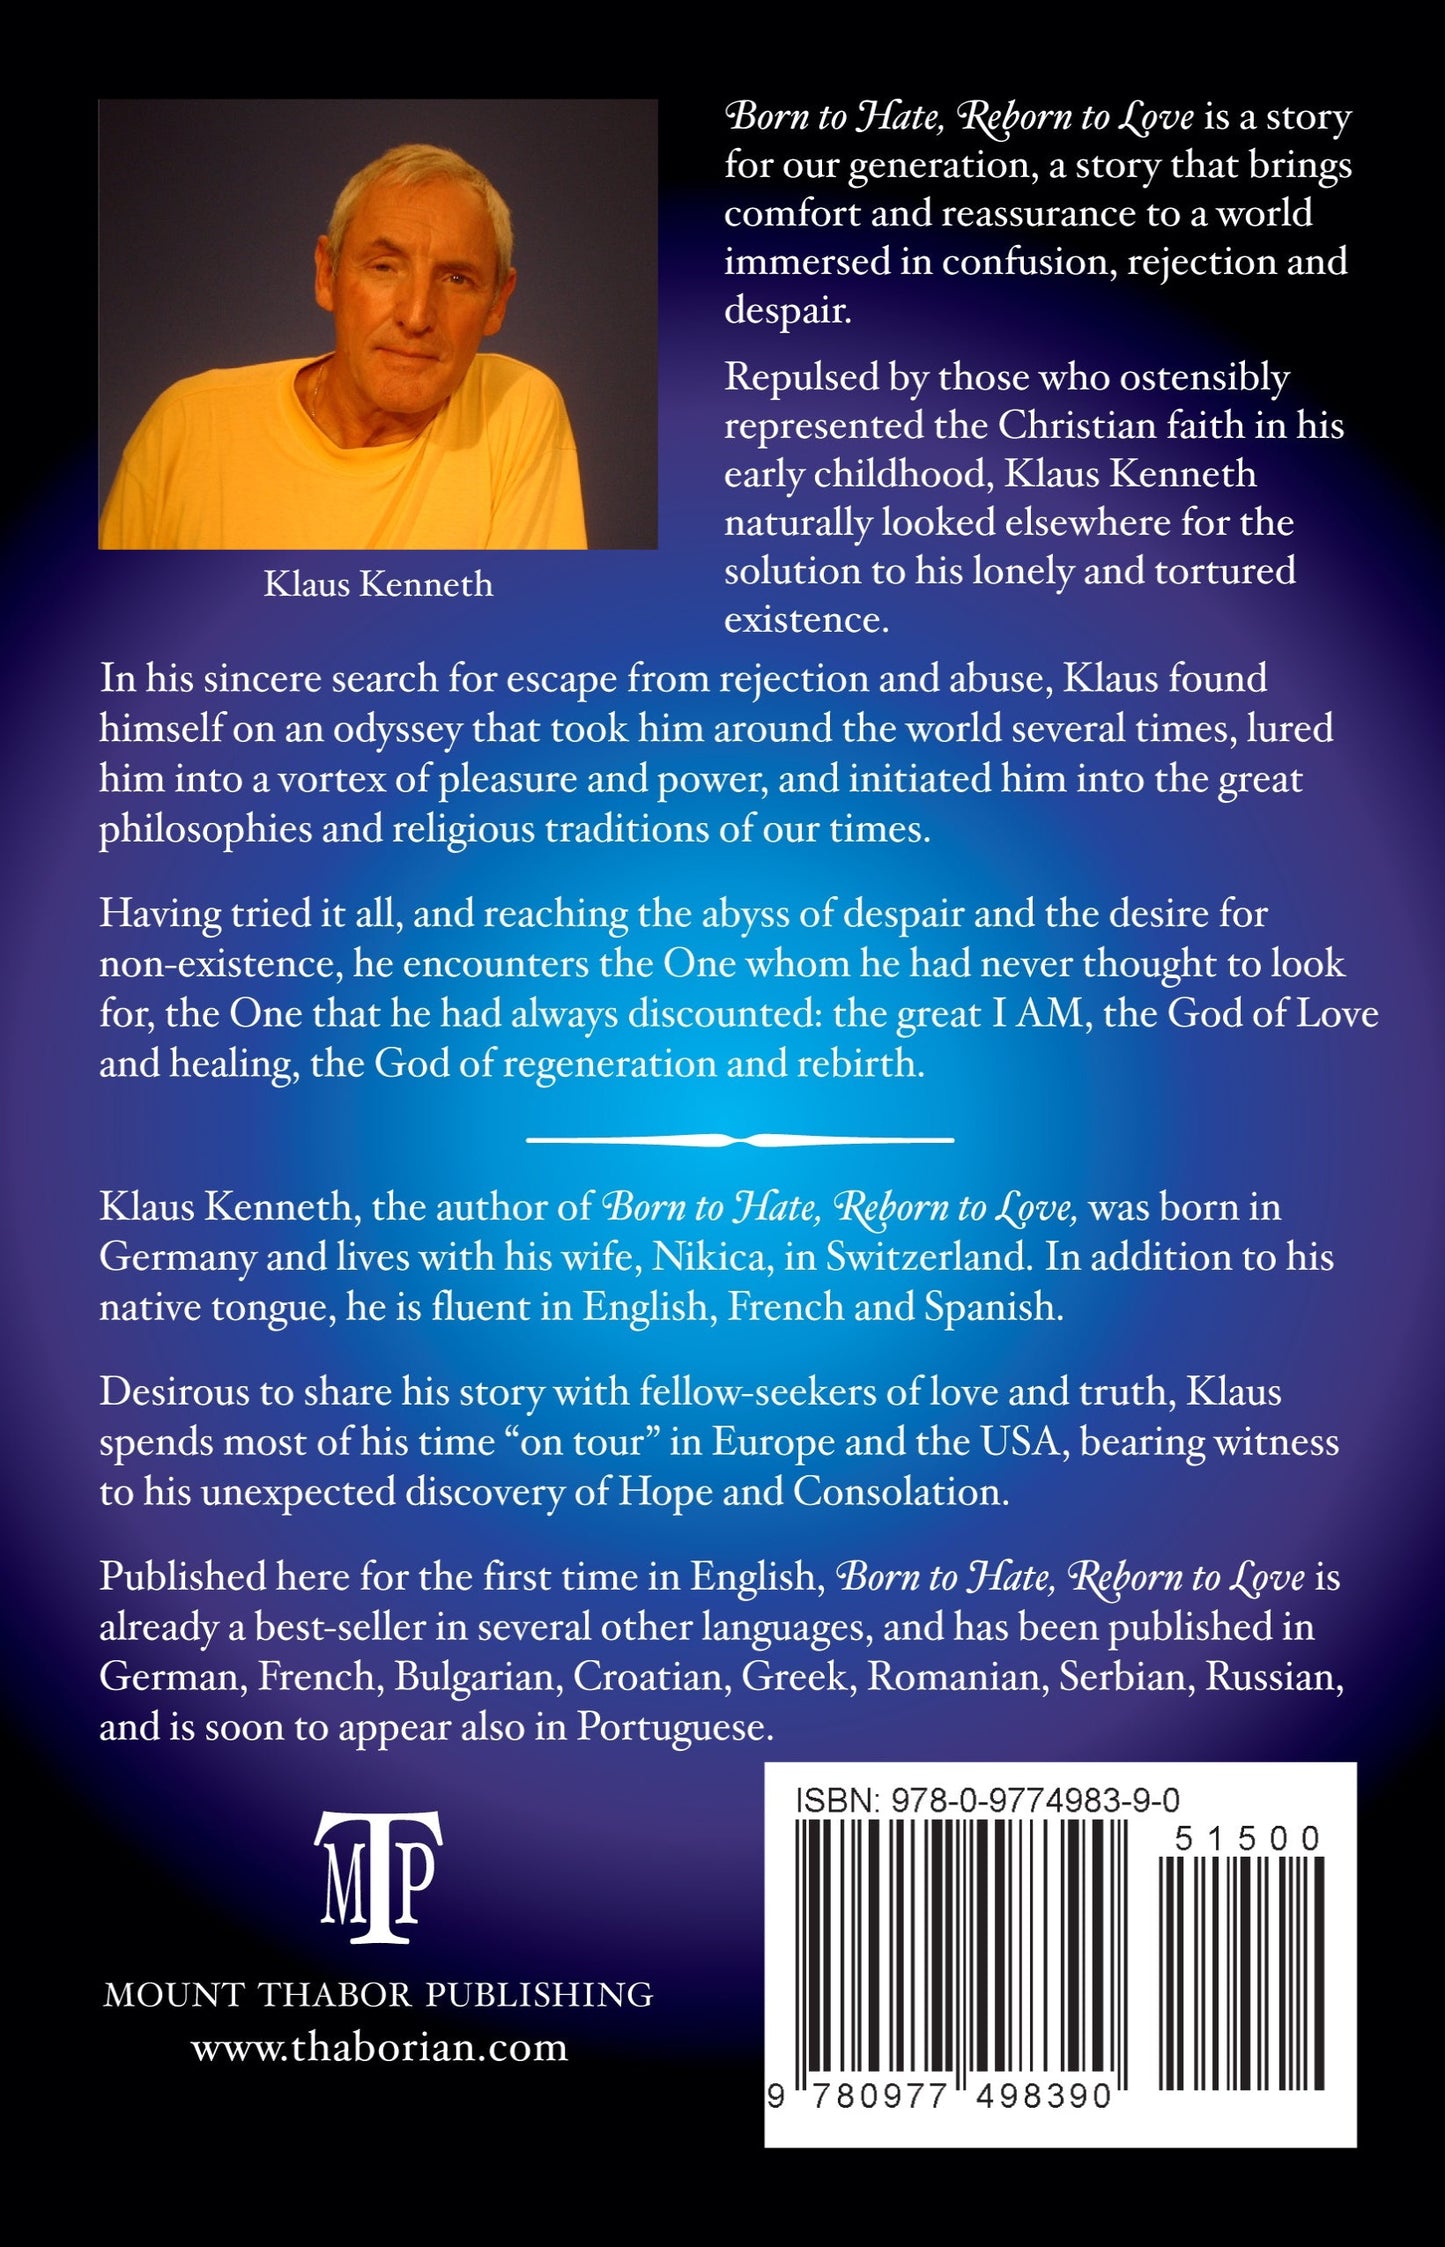 Back Cover of Born to Hate Reborn to Love by Klaus Kenneth